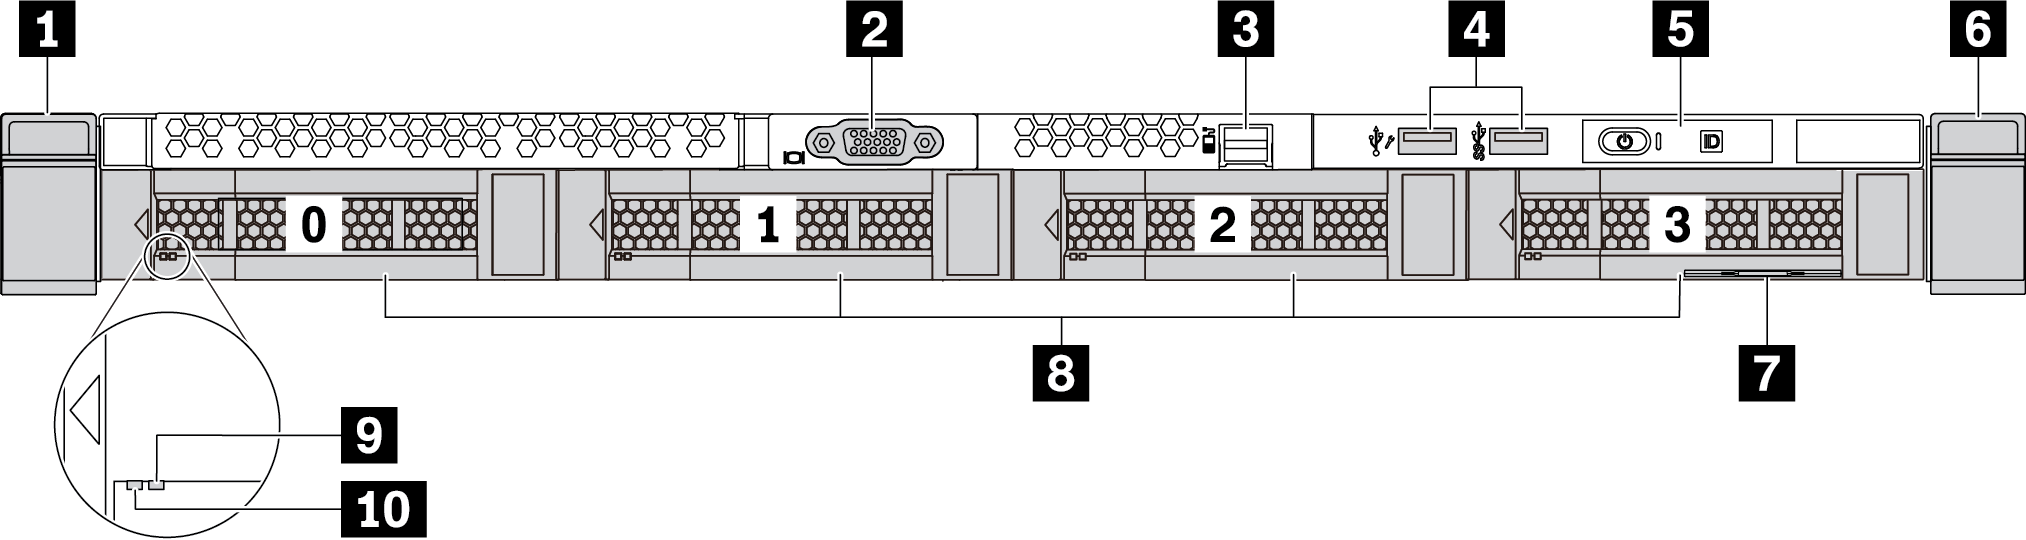 Front view of server model with four 3.5-inch drive bays